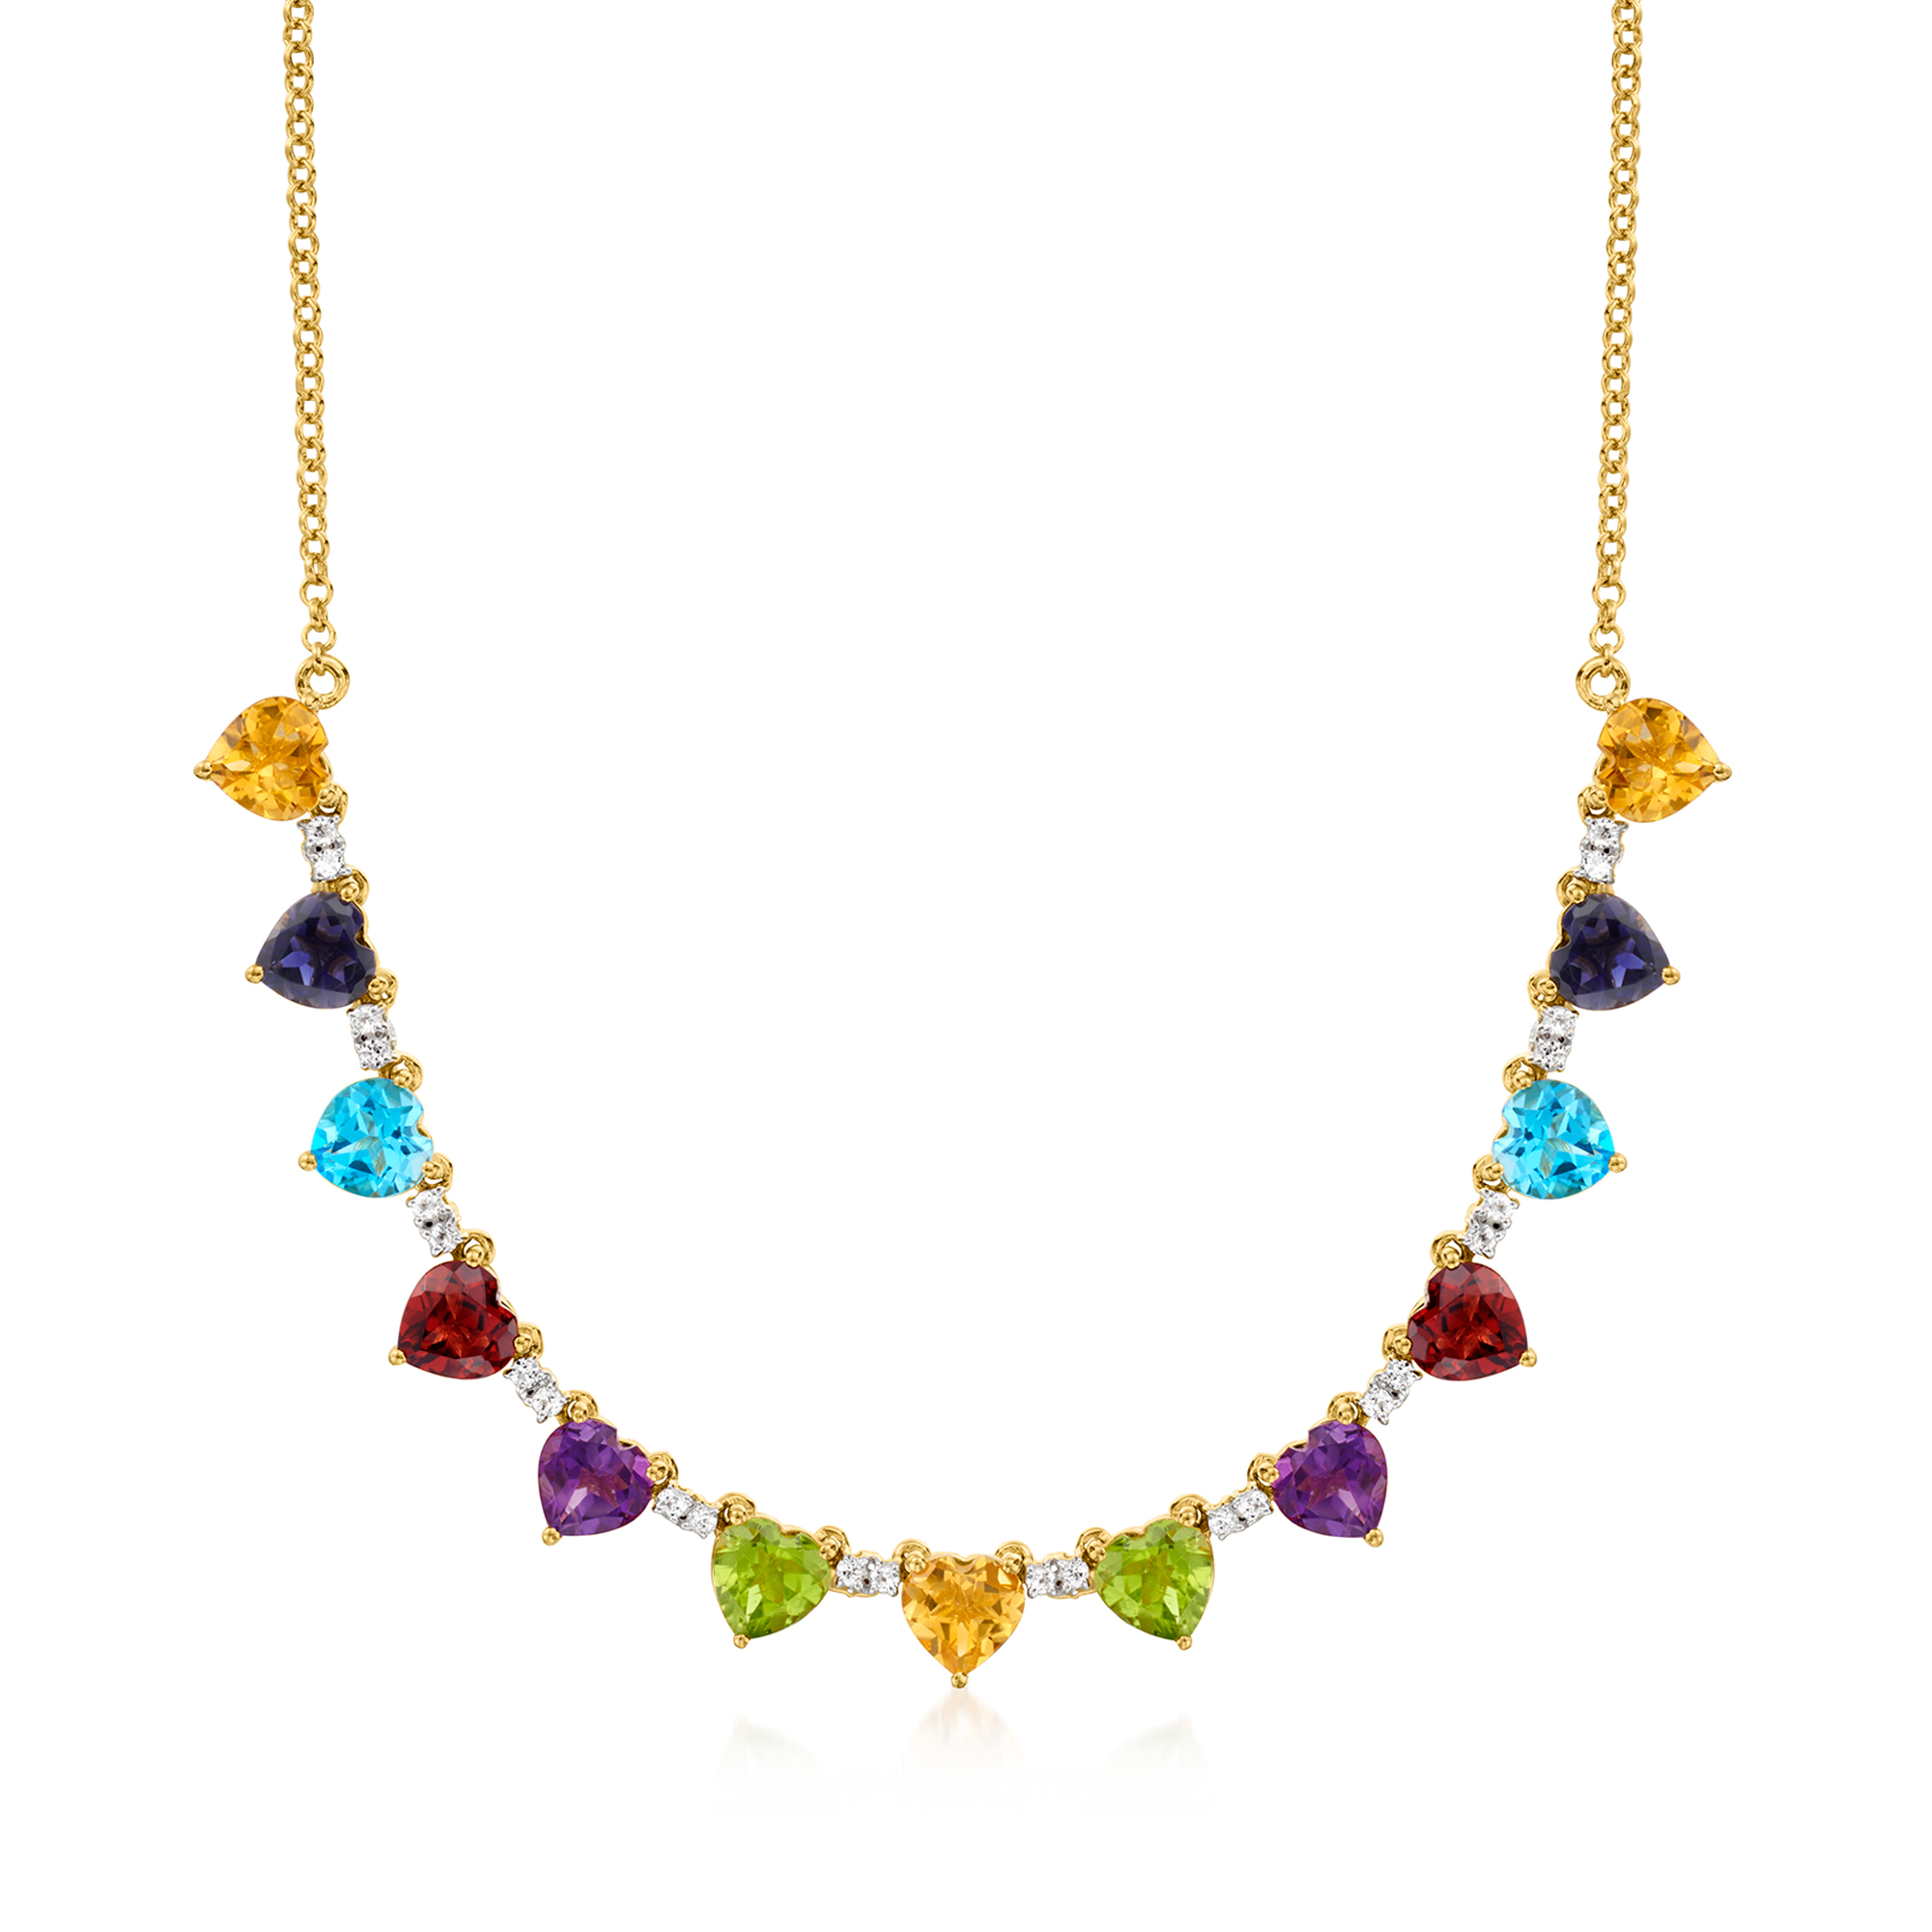 13.50 ct. t.w. Heart-Shaped Multi-Gemstone Necklace in 18kt Gold Over  Sterling. 18